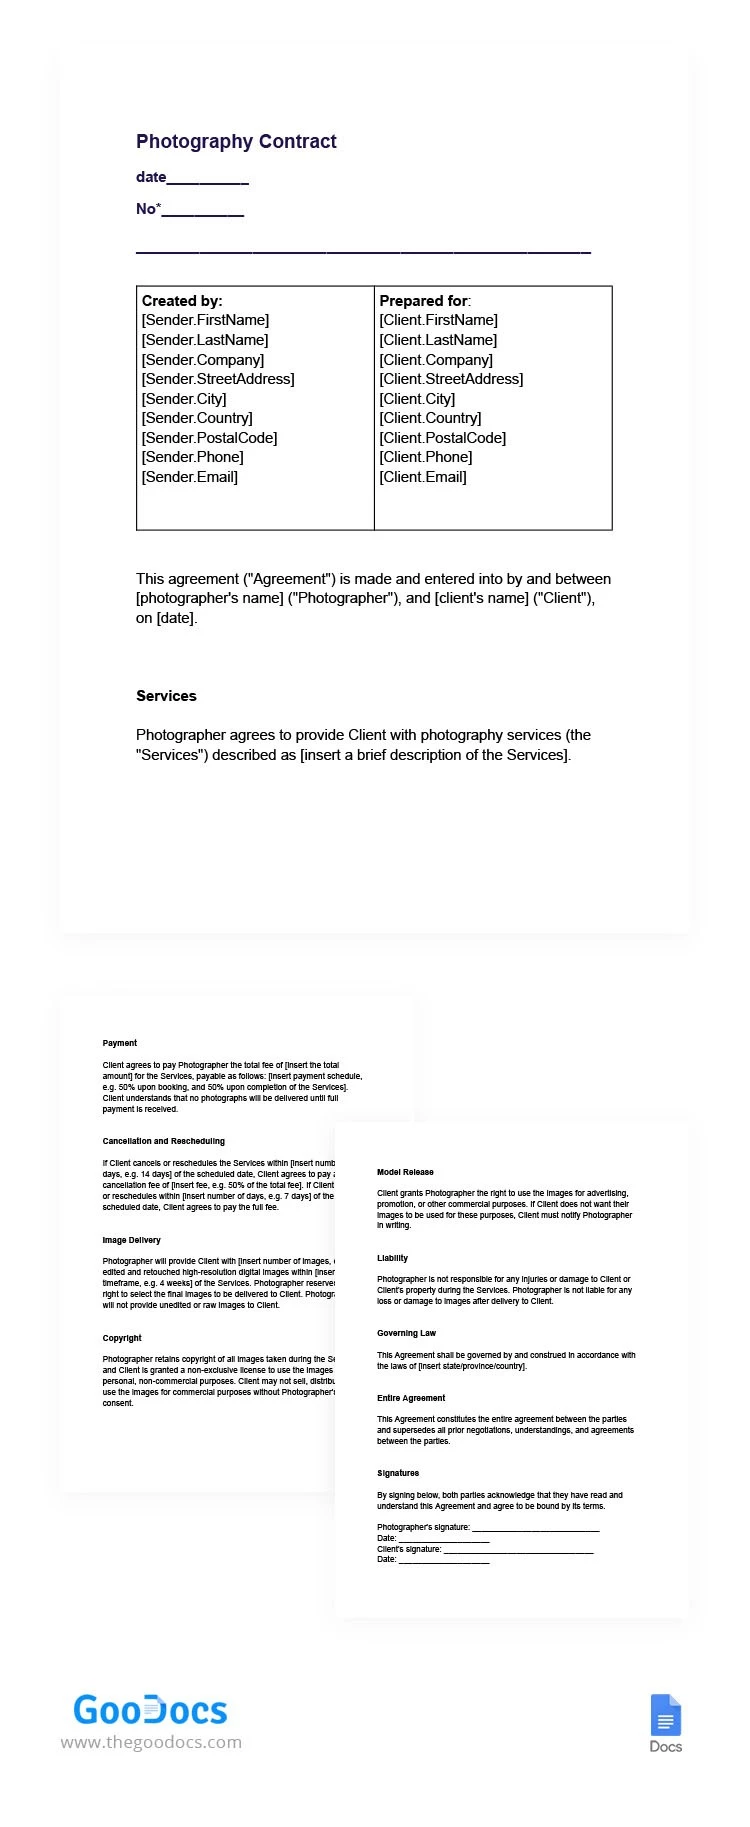 Photography Contract - free Google Docs Template - 10065722